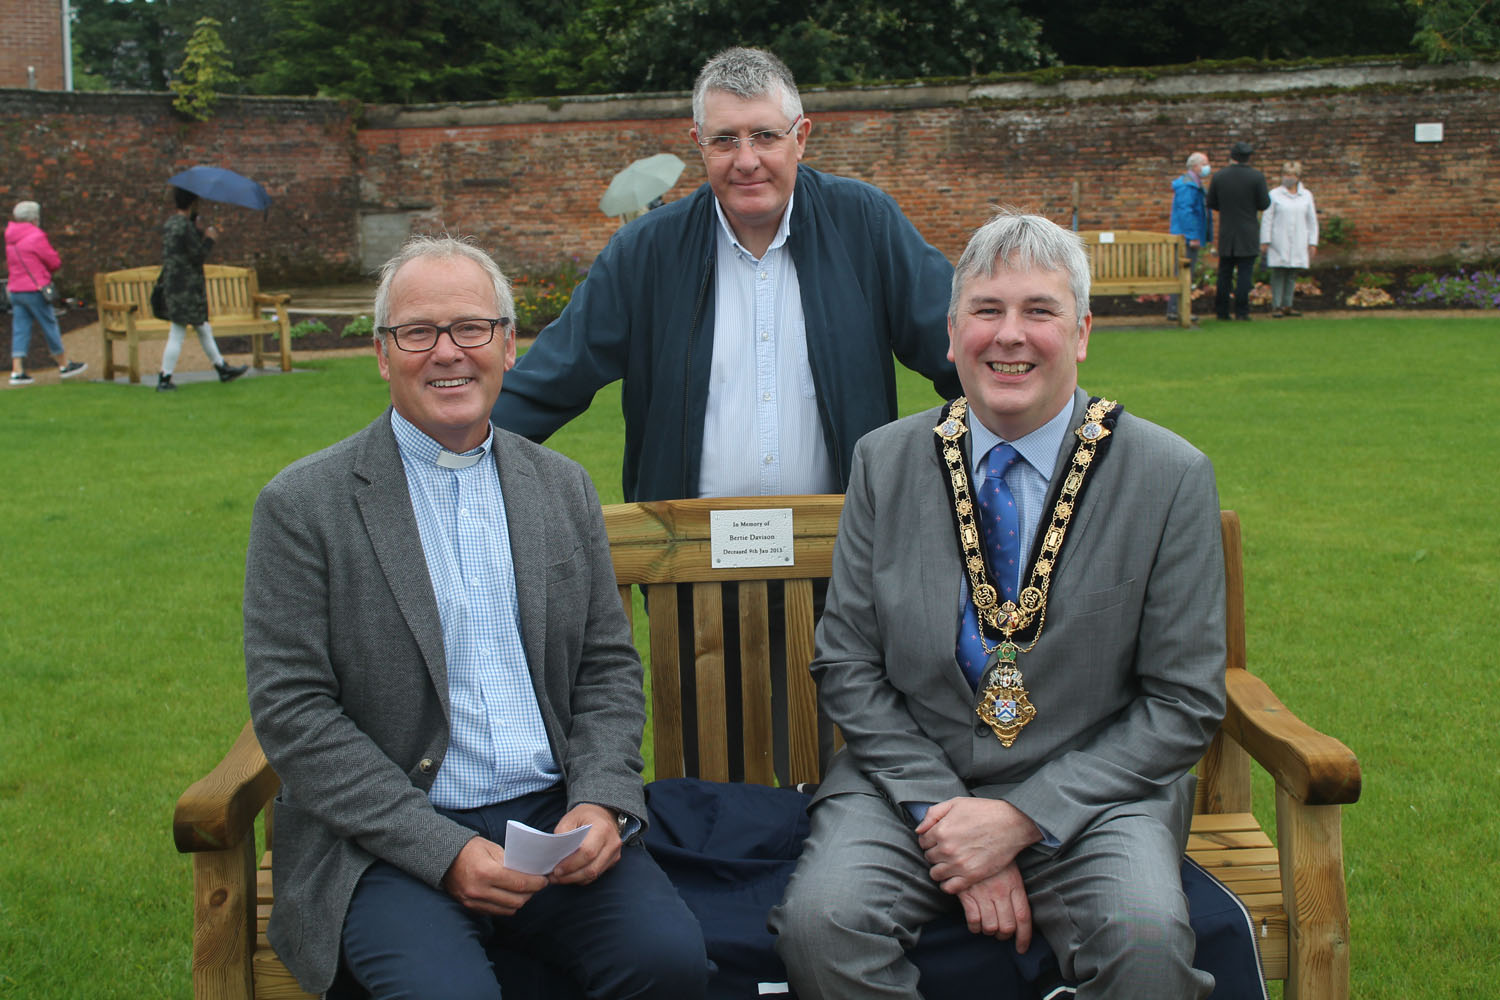 The Rev Andrew Sweeney, rector of Ballymoney, Finvoy and Rasharkin, the Mayor of Causeway Coast and Glens, Councillor Richard Holmes, and David Goodman, Warden of the Quiet Garden, at the official opening of the garden.